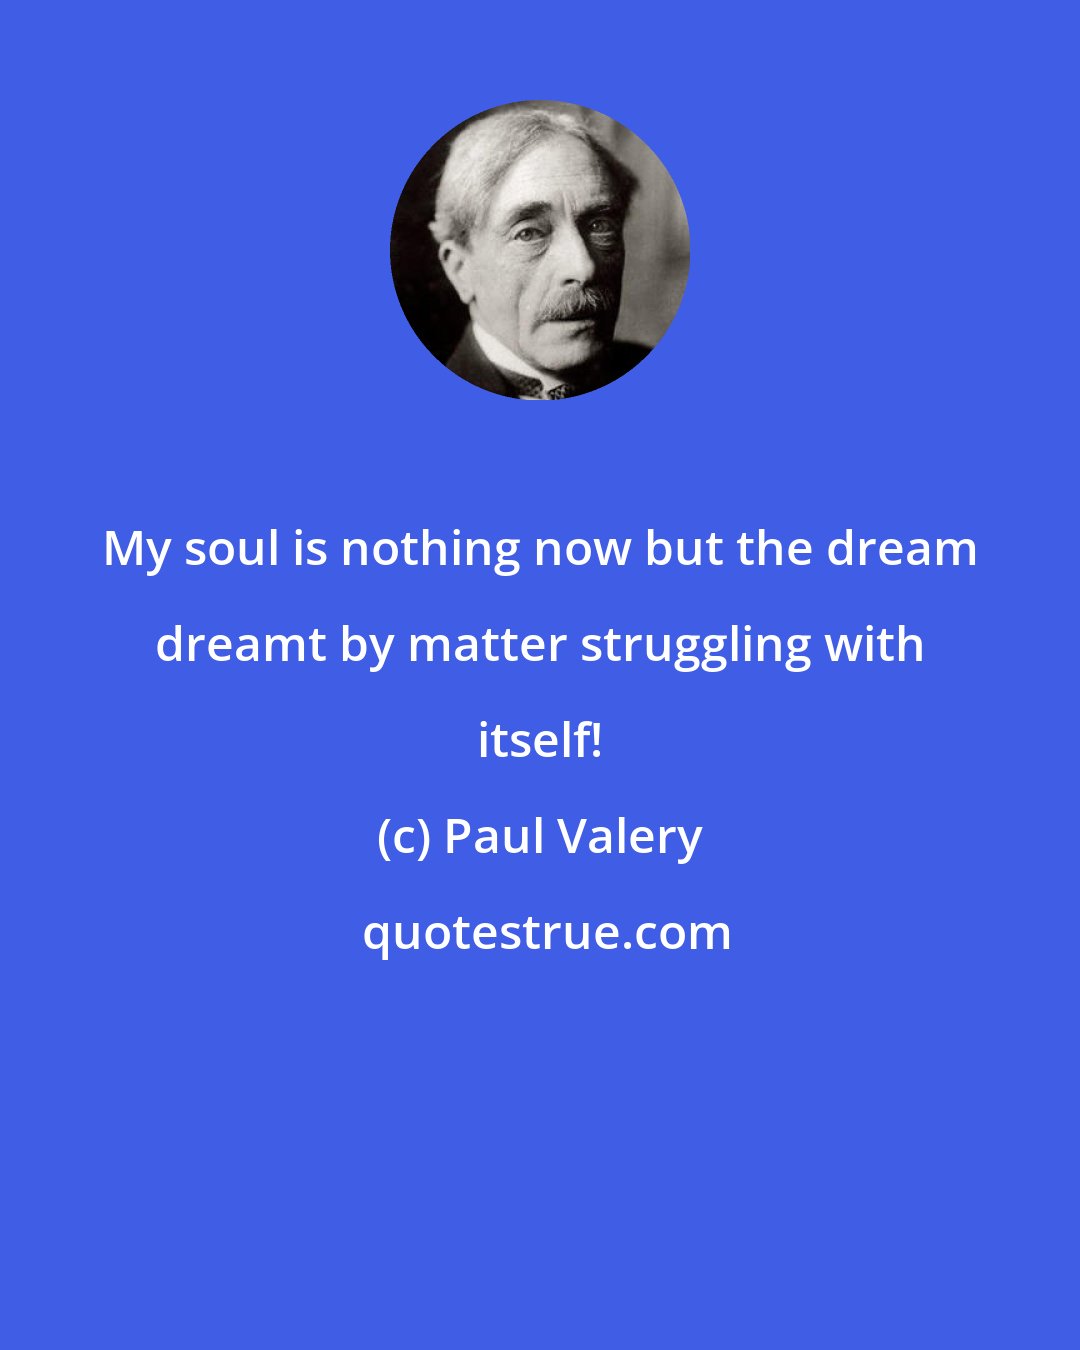 Paul Valery: My soul is nothing now but the dream dreamt by matter struggling with itself!